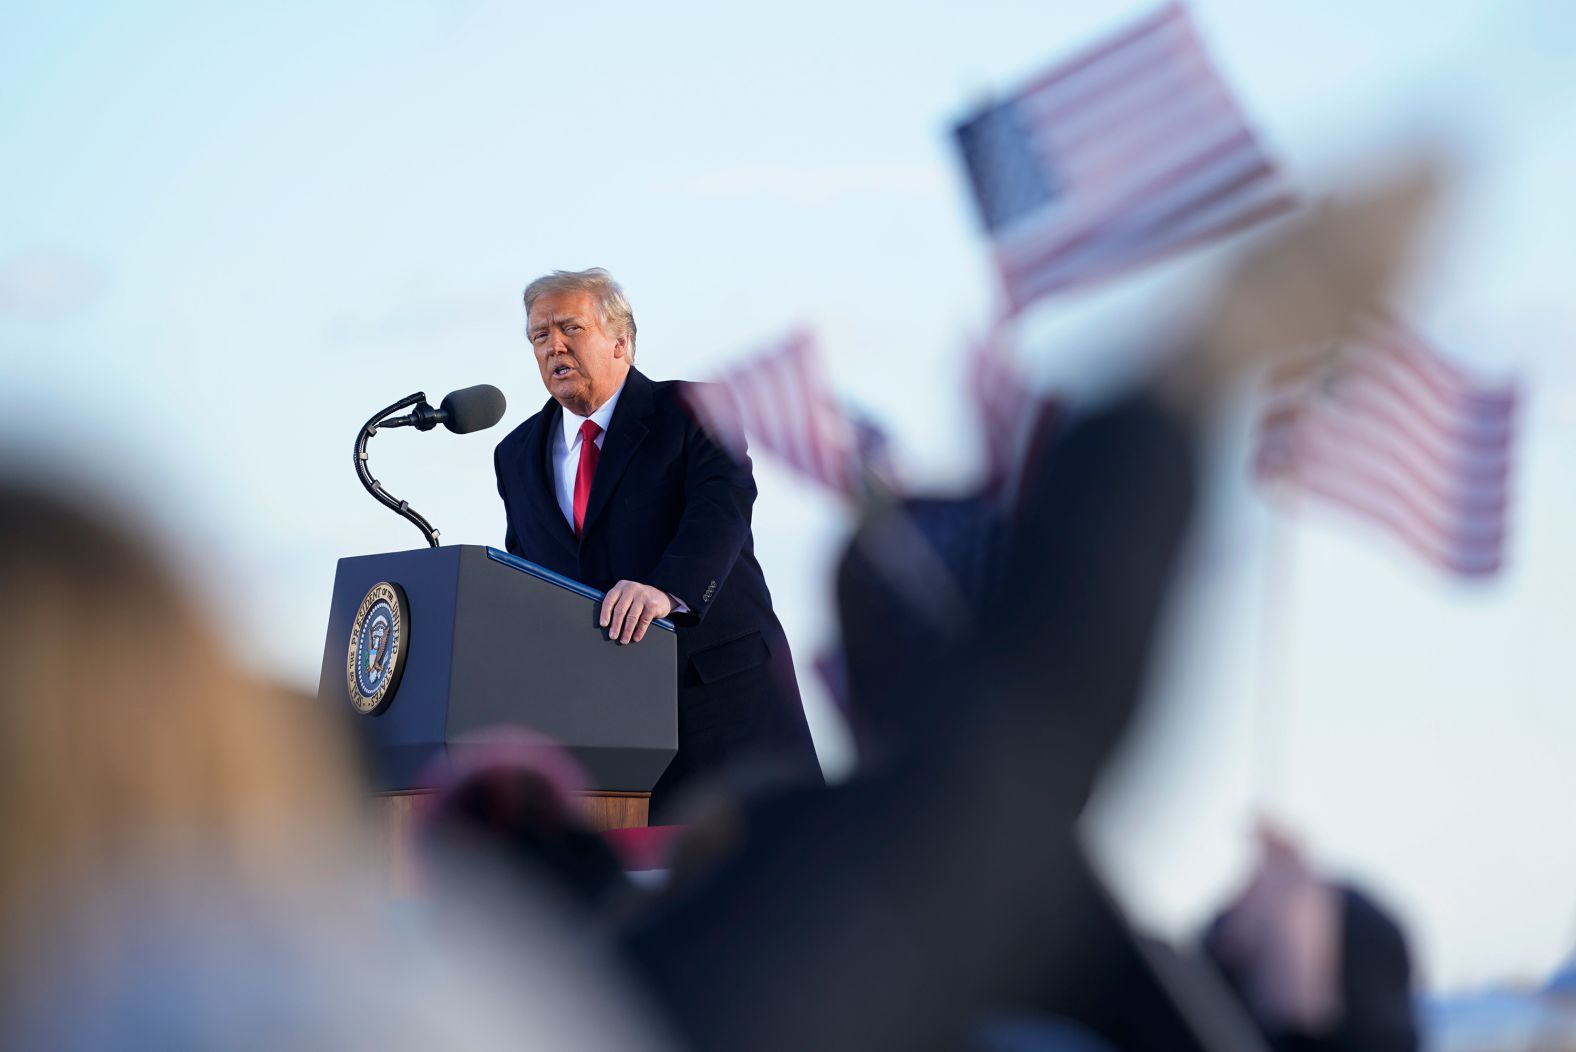 Trump gives a farewell speech before boarding Air Force One at Joint Base Andrews. "I will always fight for you,"<a href="index.php?page=&url=https%3A%2F%2Fwww.cnn.com%2Fpolitics%2Flive-news%2Fbiden-harris-inauguration-day-2021%2Fh_c7d52b0352ef4bfed902fd3b12d8a24b" target="_blank"> he said in front of a crowd of family and friends.</a> "I will be watching. I will be listening, and I will tell you that the future of this country has never been better. I wish the new administration great luck and great success. I think they'll have great success. They have the foundation to do something really spectacular."